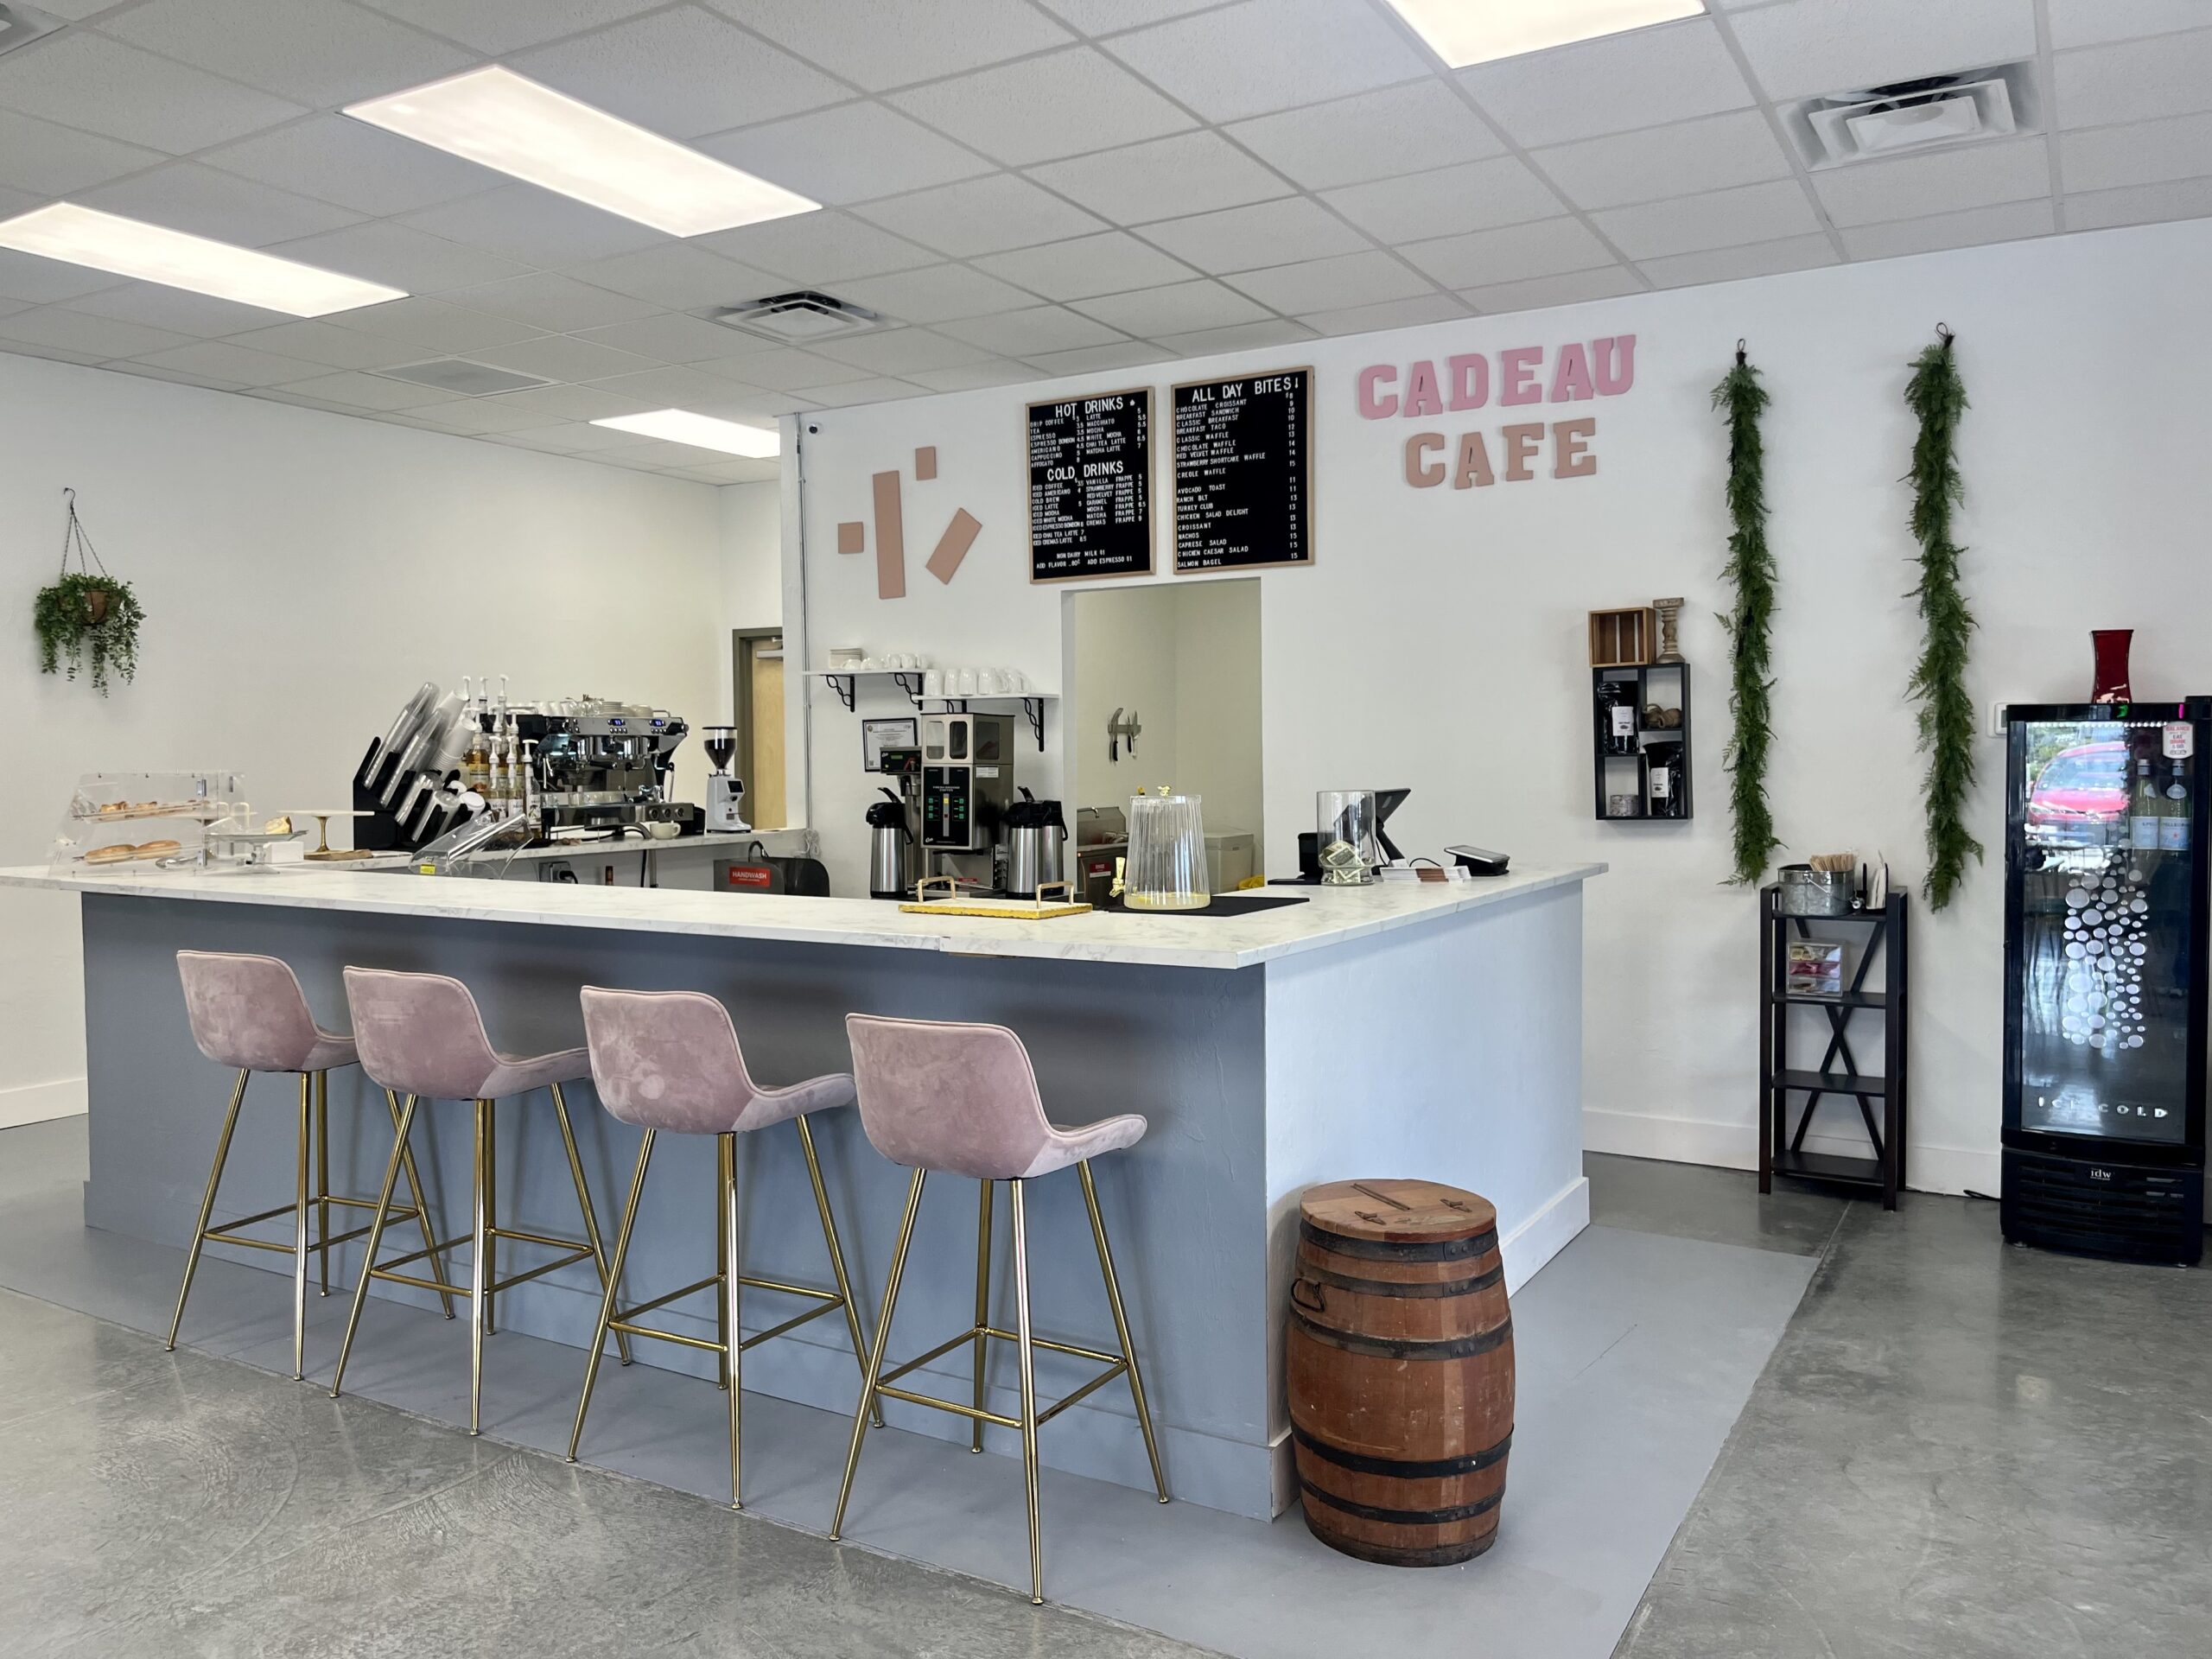 Cadeau Cafe opens on Metro Parkway in Fort Myers - Gulfshore Business